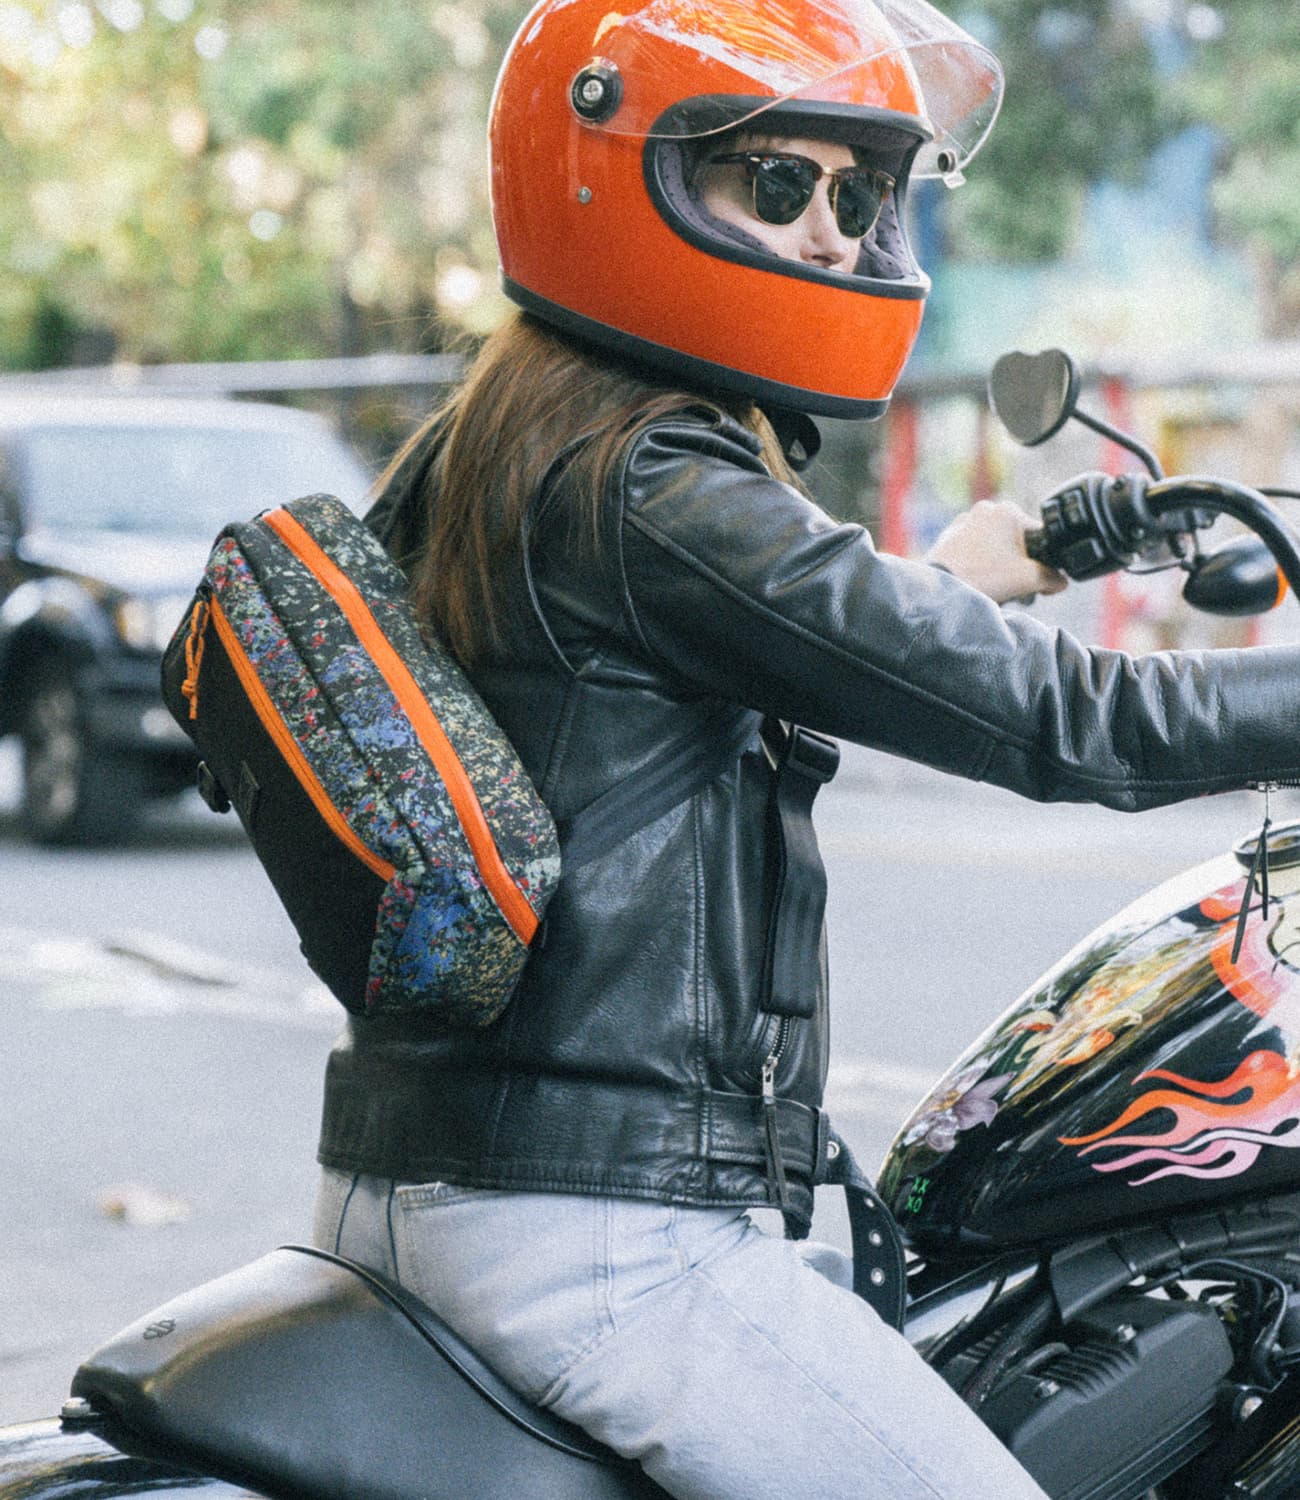 Mini Kadet Sling bag worn by a person on a motorcycle